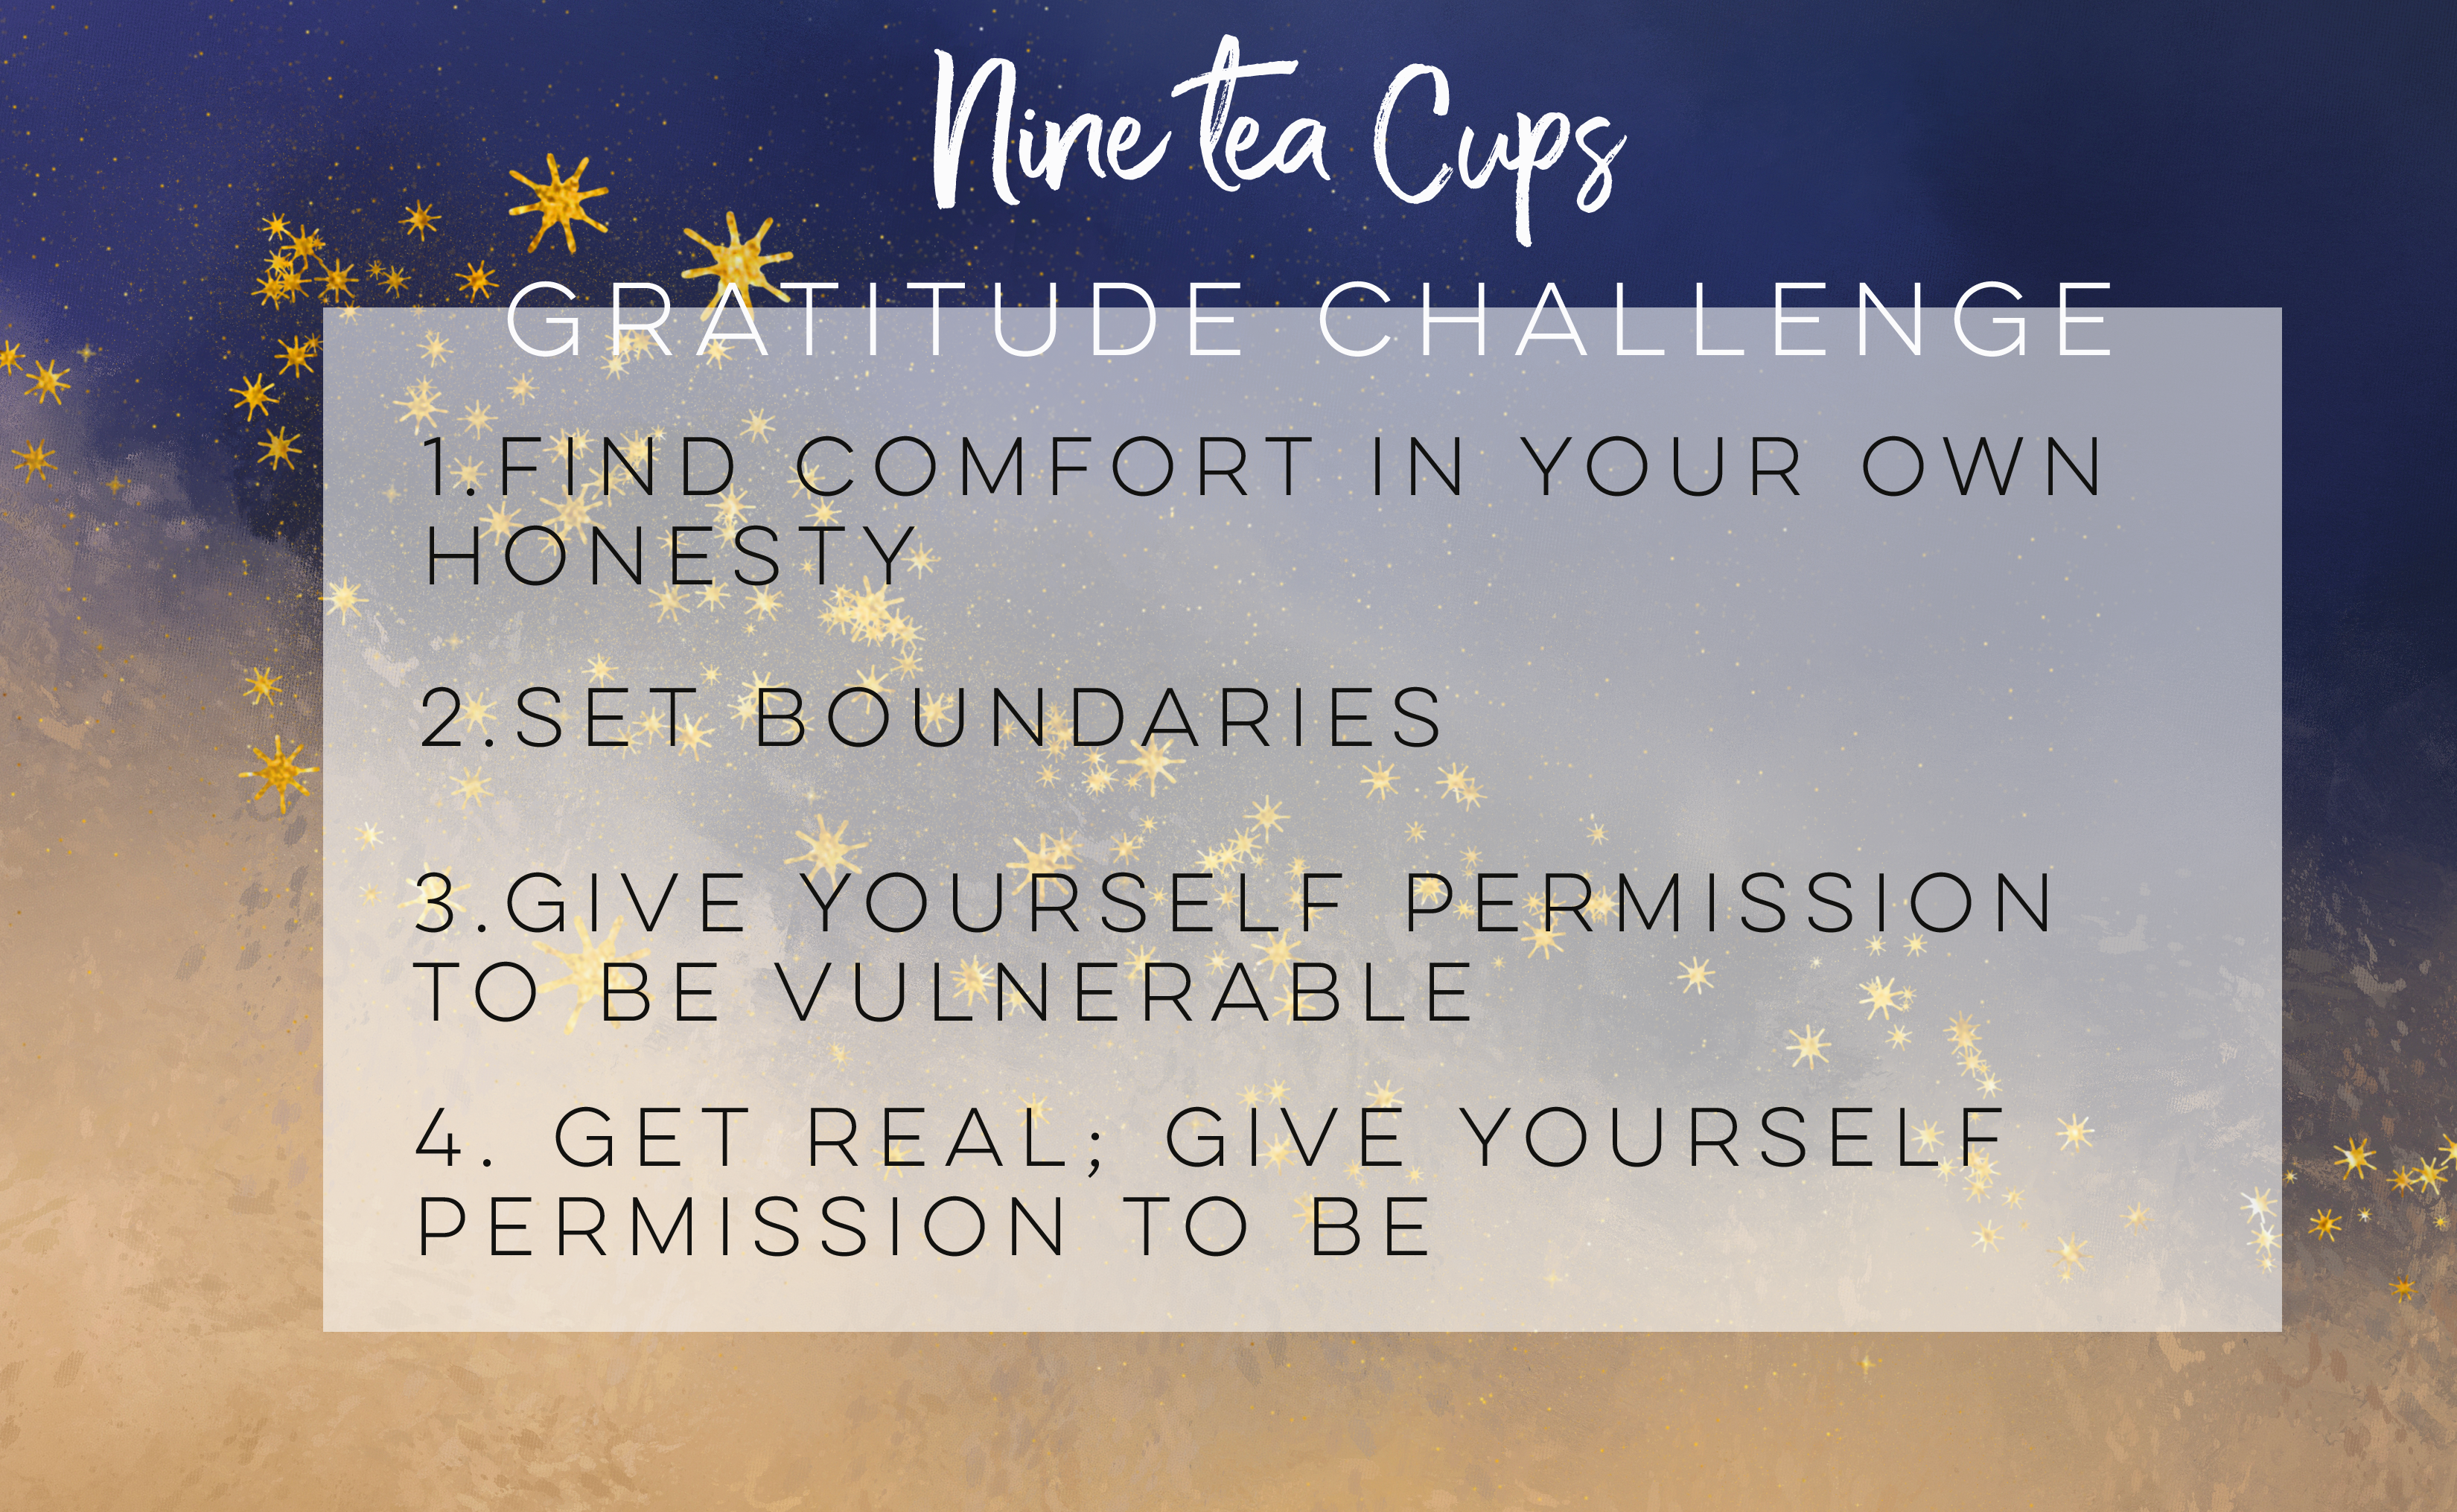 nine tea cups gratitude challenge resource post 2 - getting past insecurity and shame